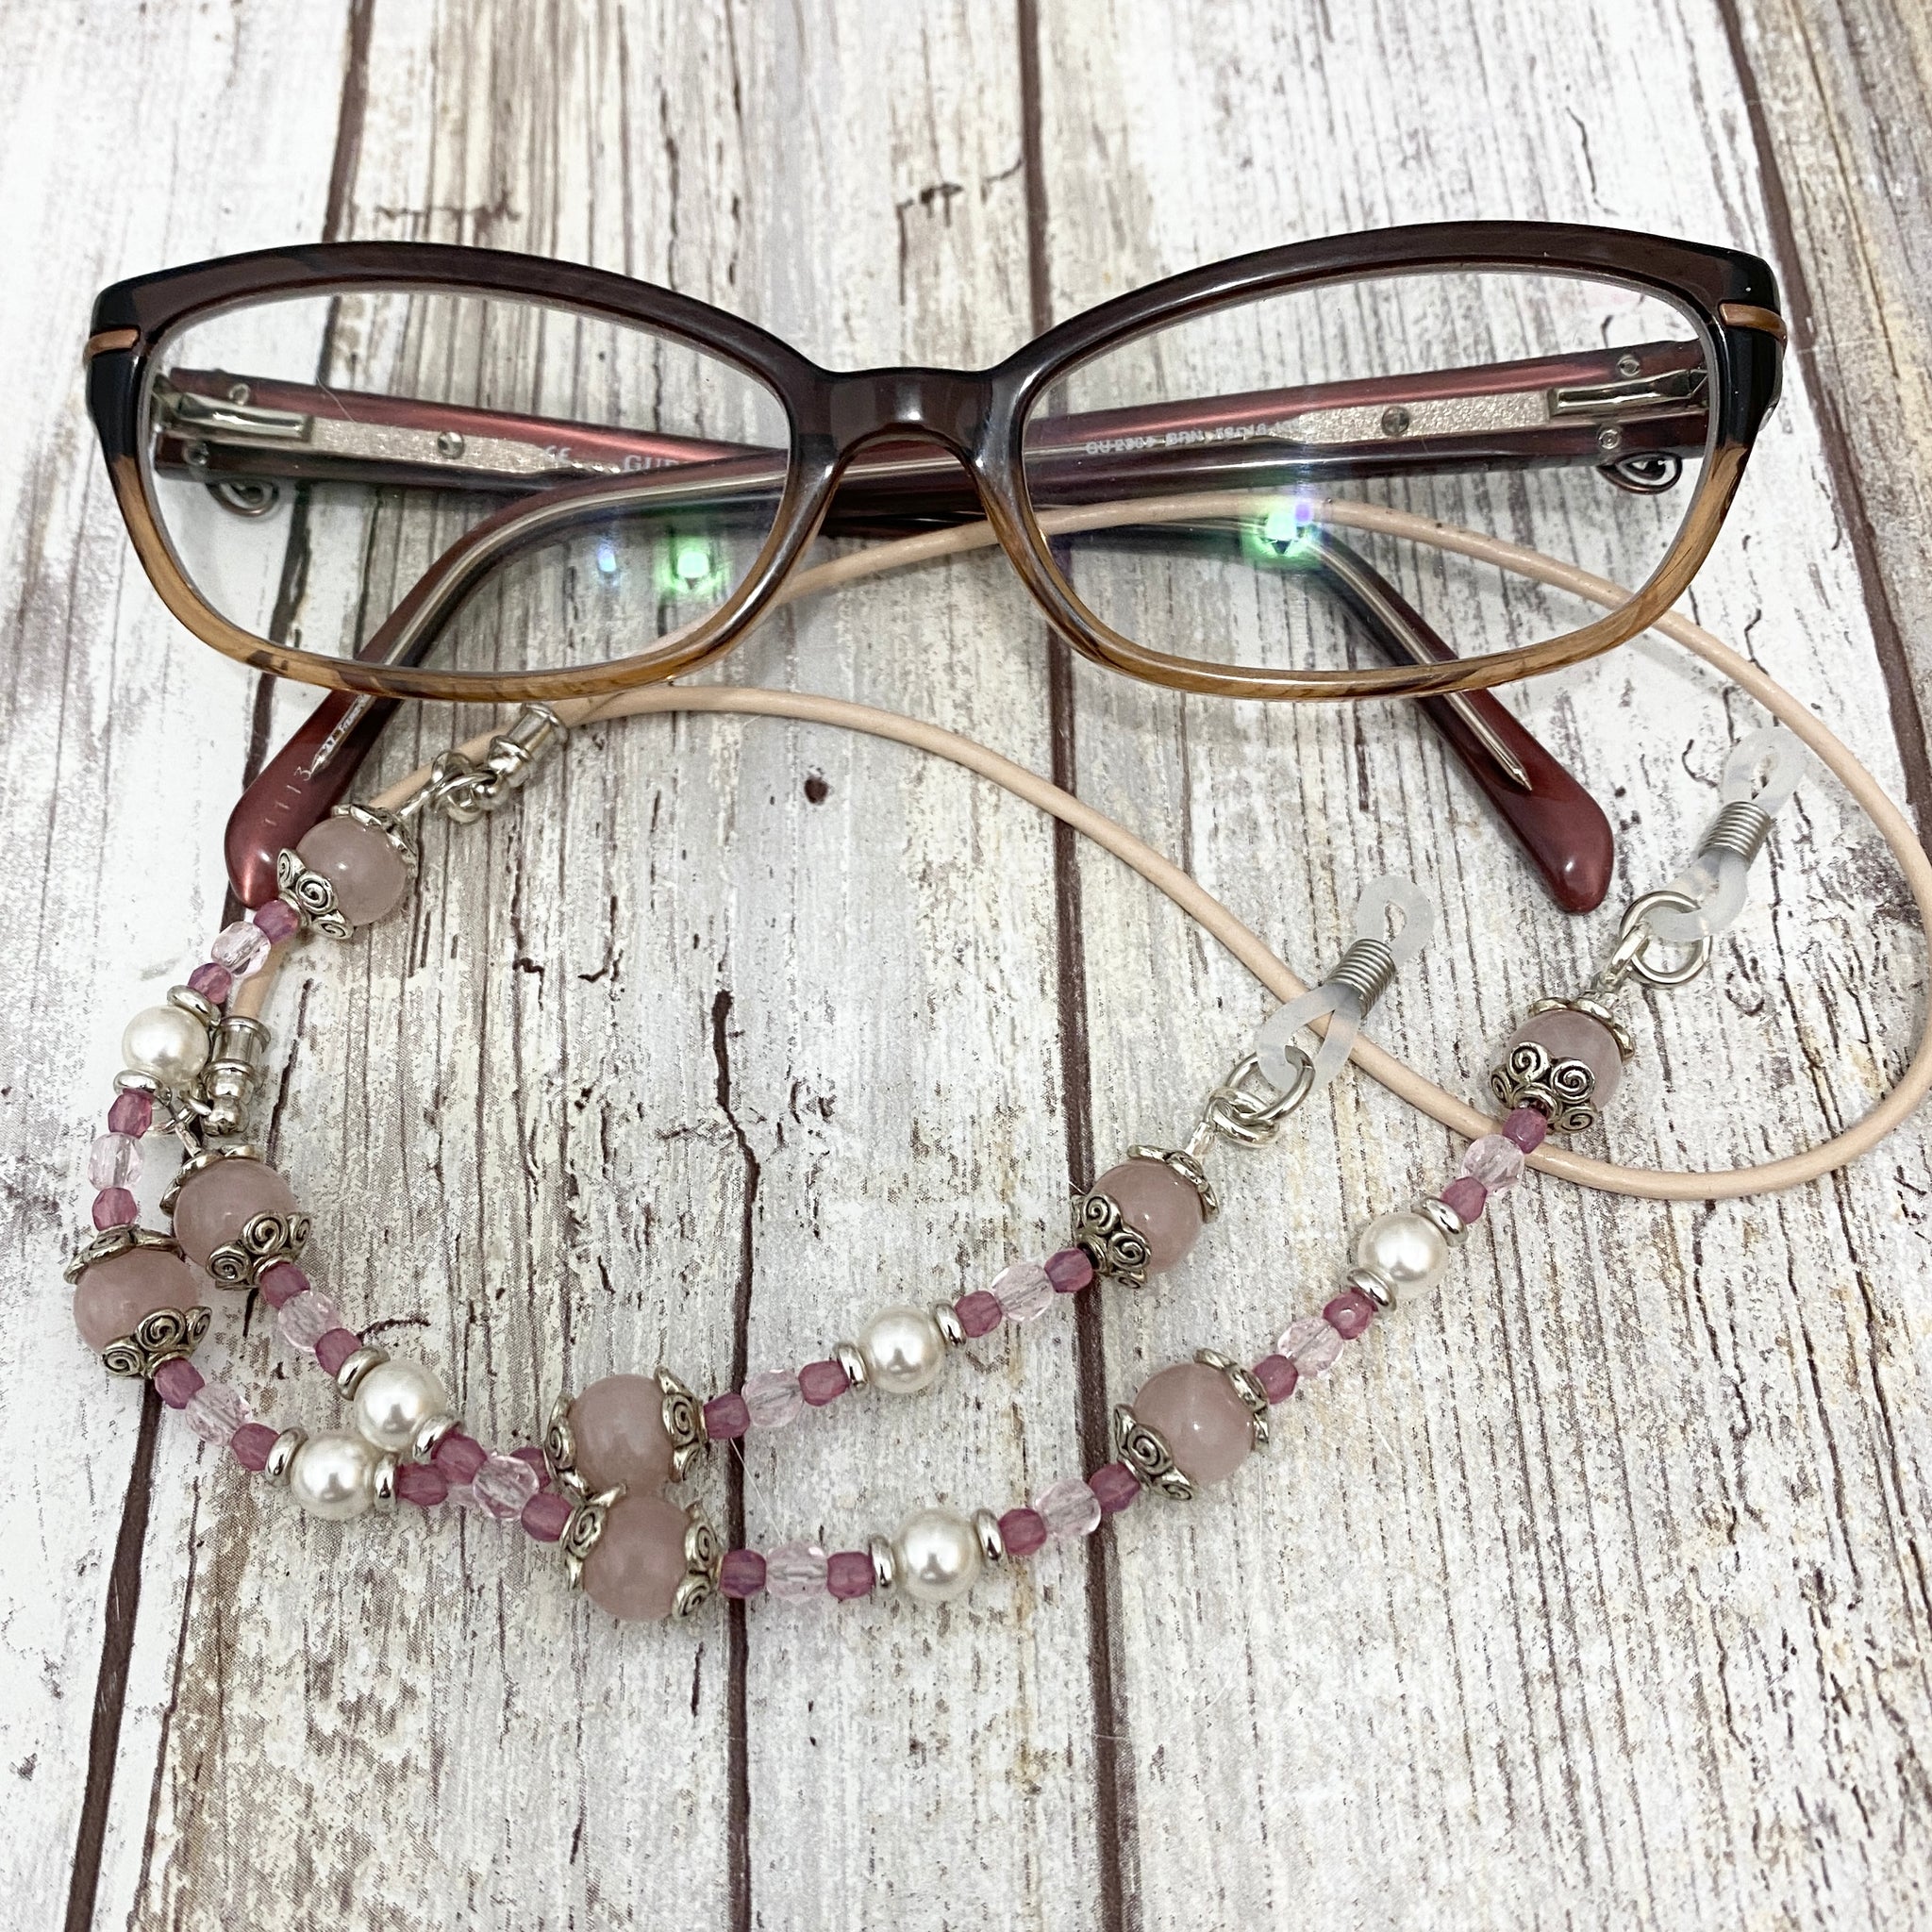 Romantic Pink & Pearls Beaded & Leather Eye Glass Cord Leash Necklace